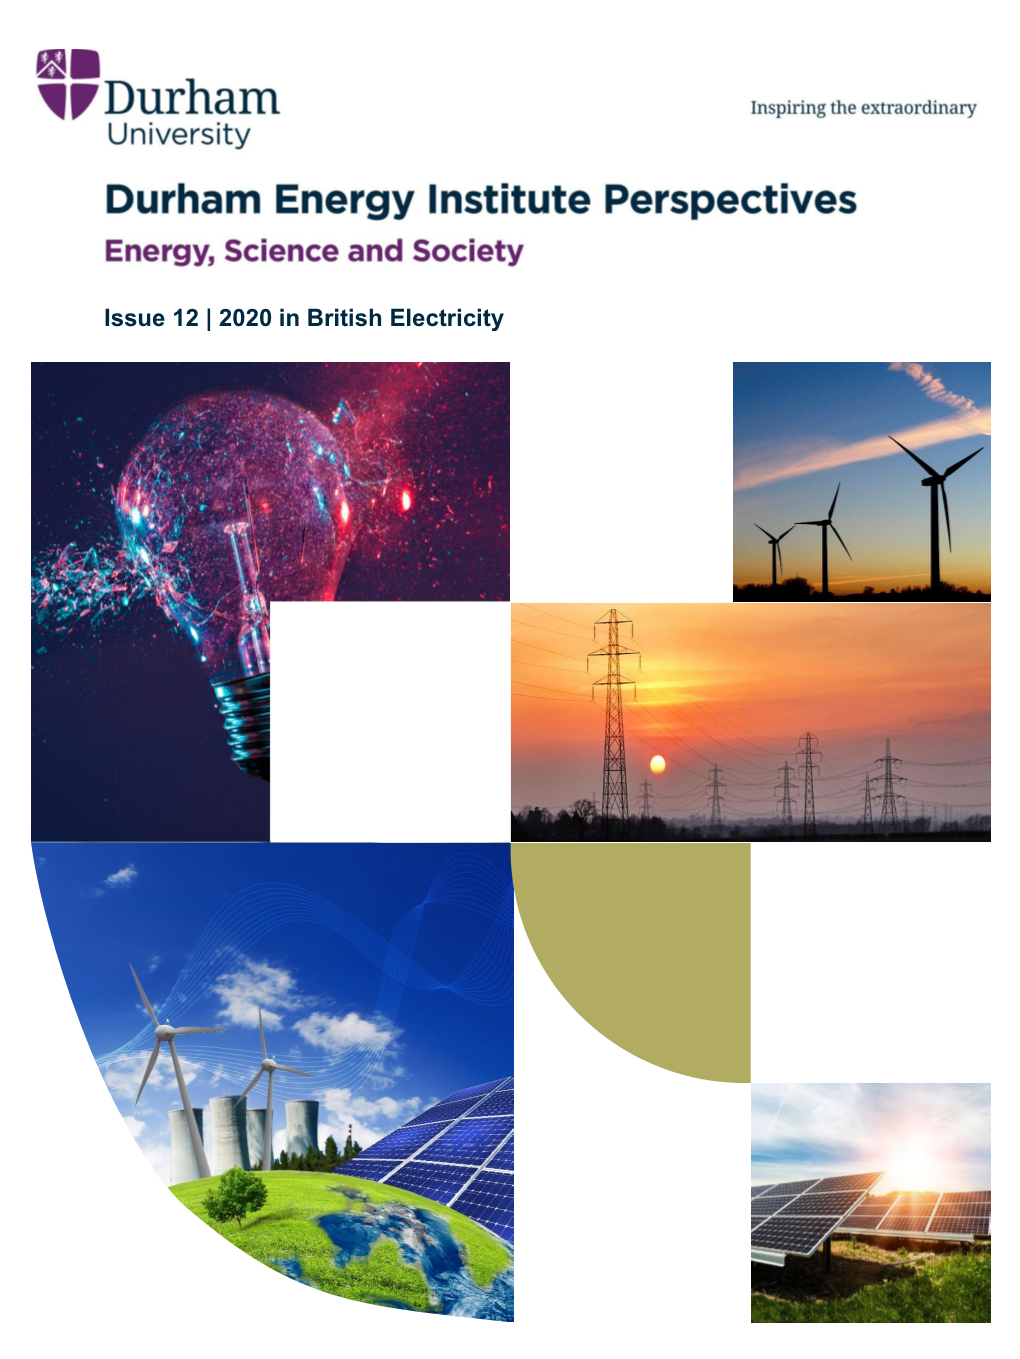 Issue 12 | 2020 in British Electricity